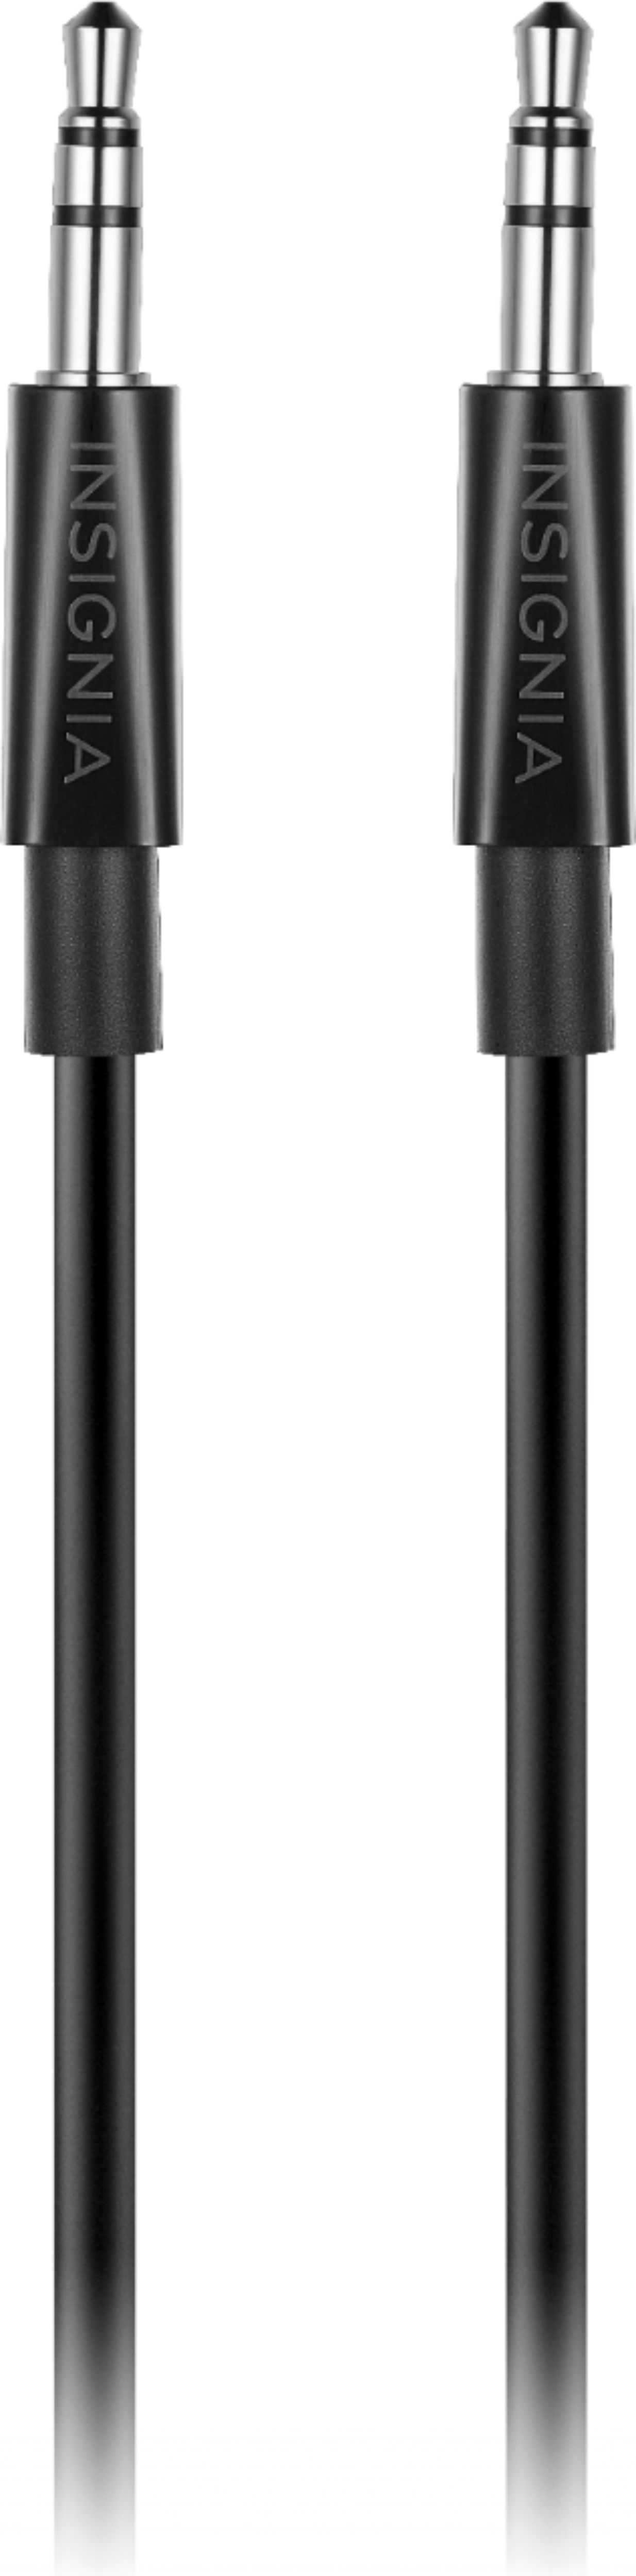 Insignia™ 10' 3.5mm Audio Cable Black NS-LW64 - Best Buy